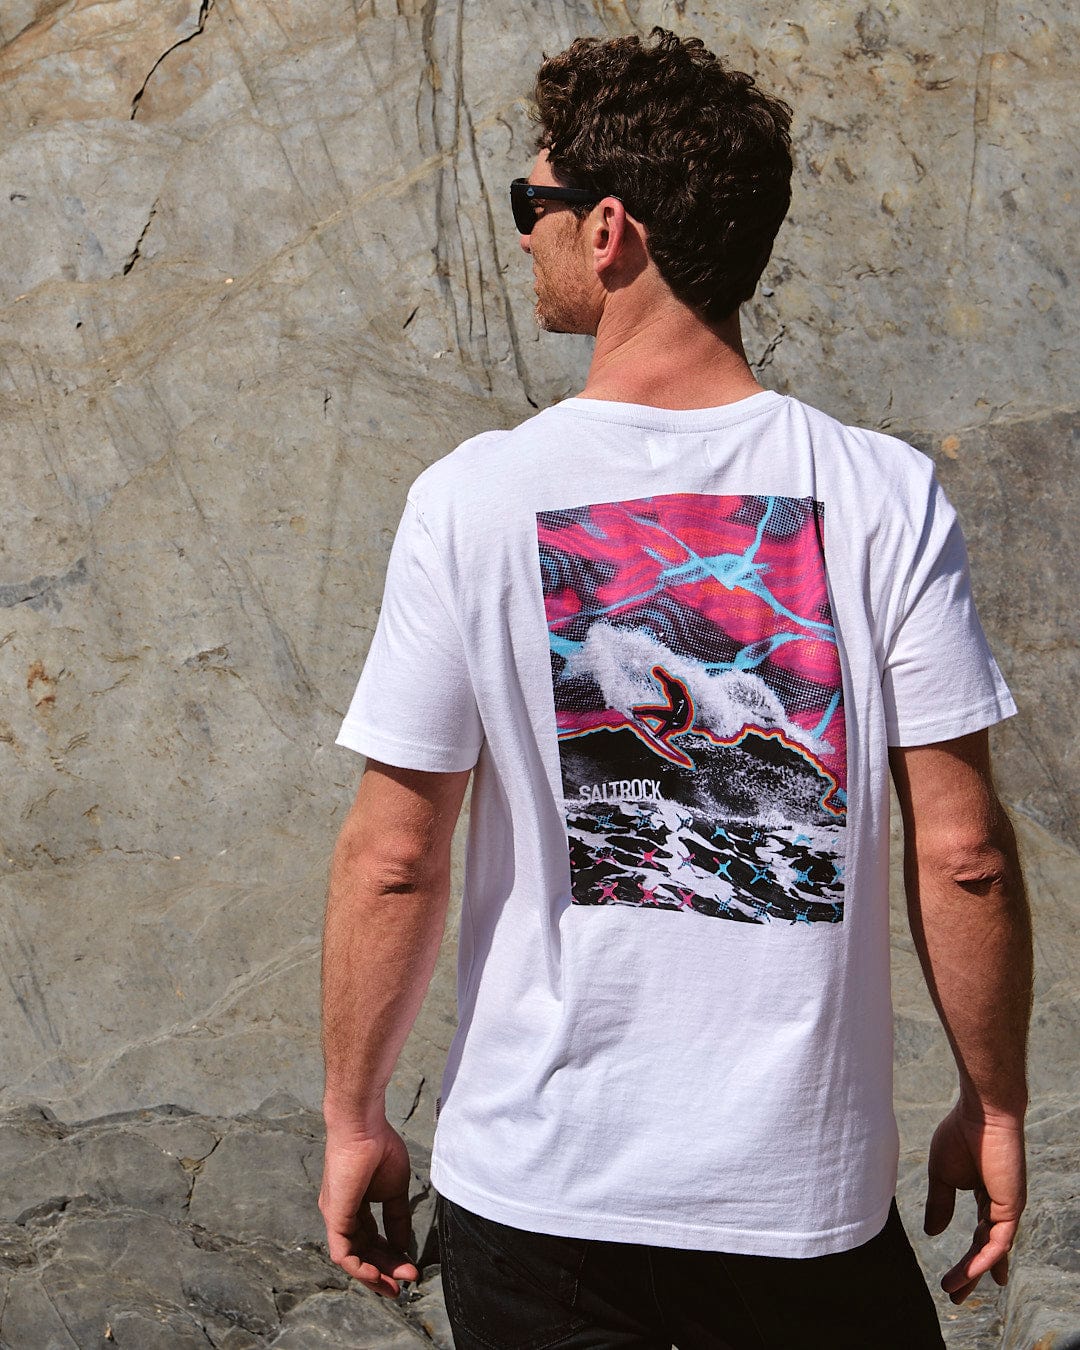 The back of a man wearing sunglasses and a Saltrock Poolside Wave - Mens Short Sleeve T-Shirt - White.